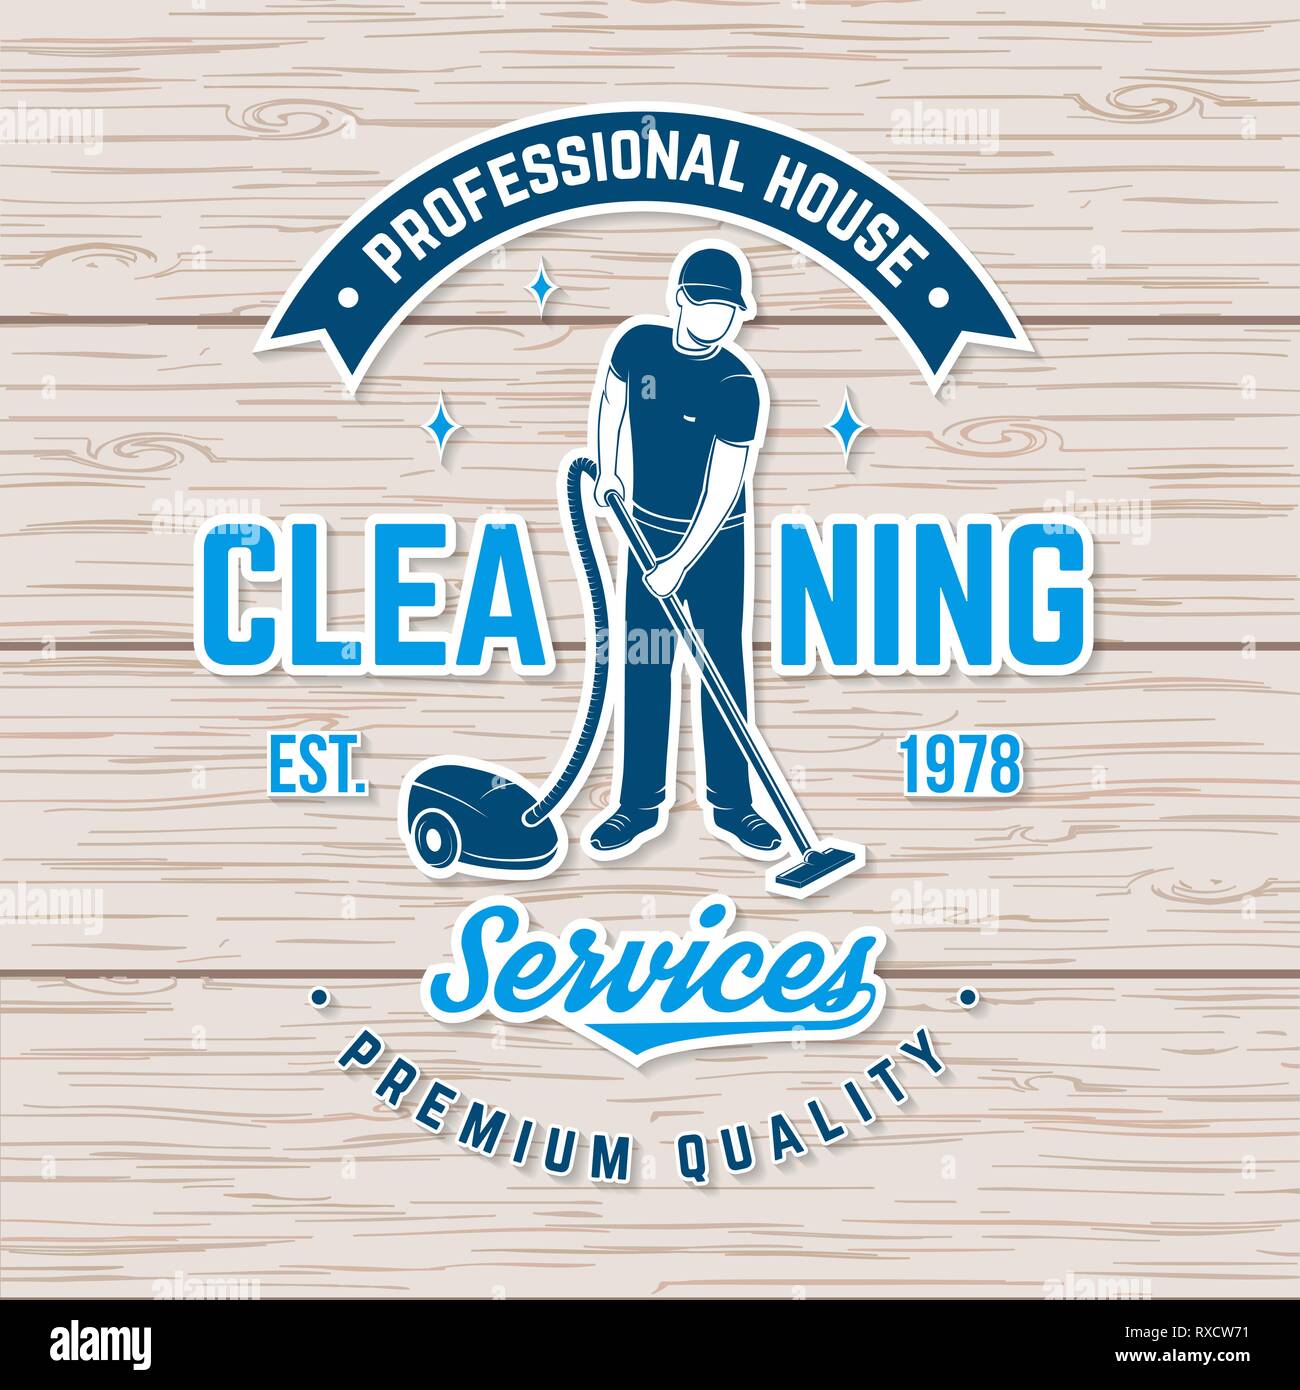 Cleaning company badge, emblem. Vector illustration. Concept for shirt, print, stamp or sticker. Vintage typography design with man and Vacuum Cleaner. Cleaning service sign for company related business Stock Vector